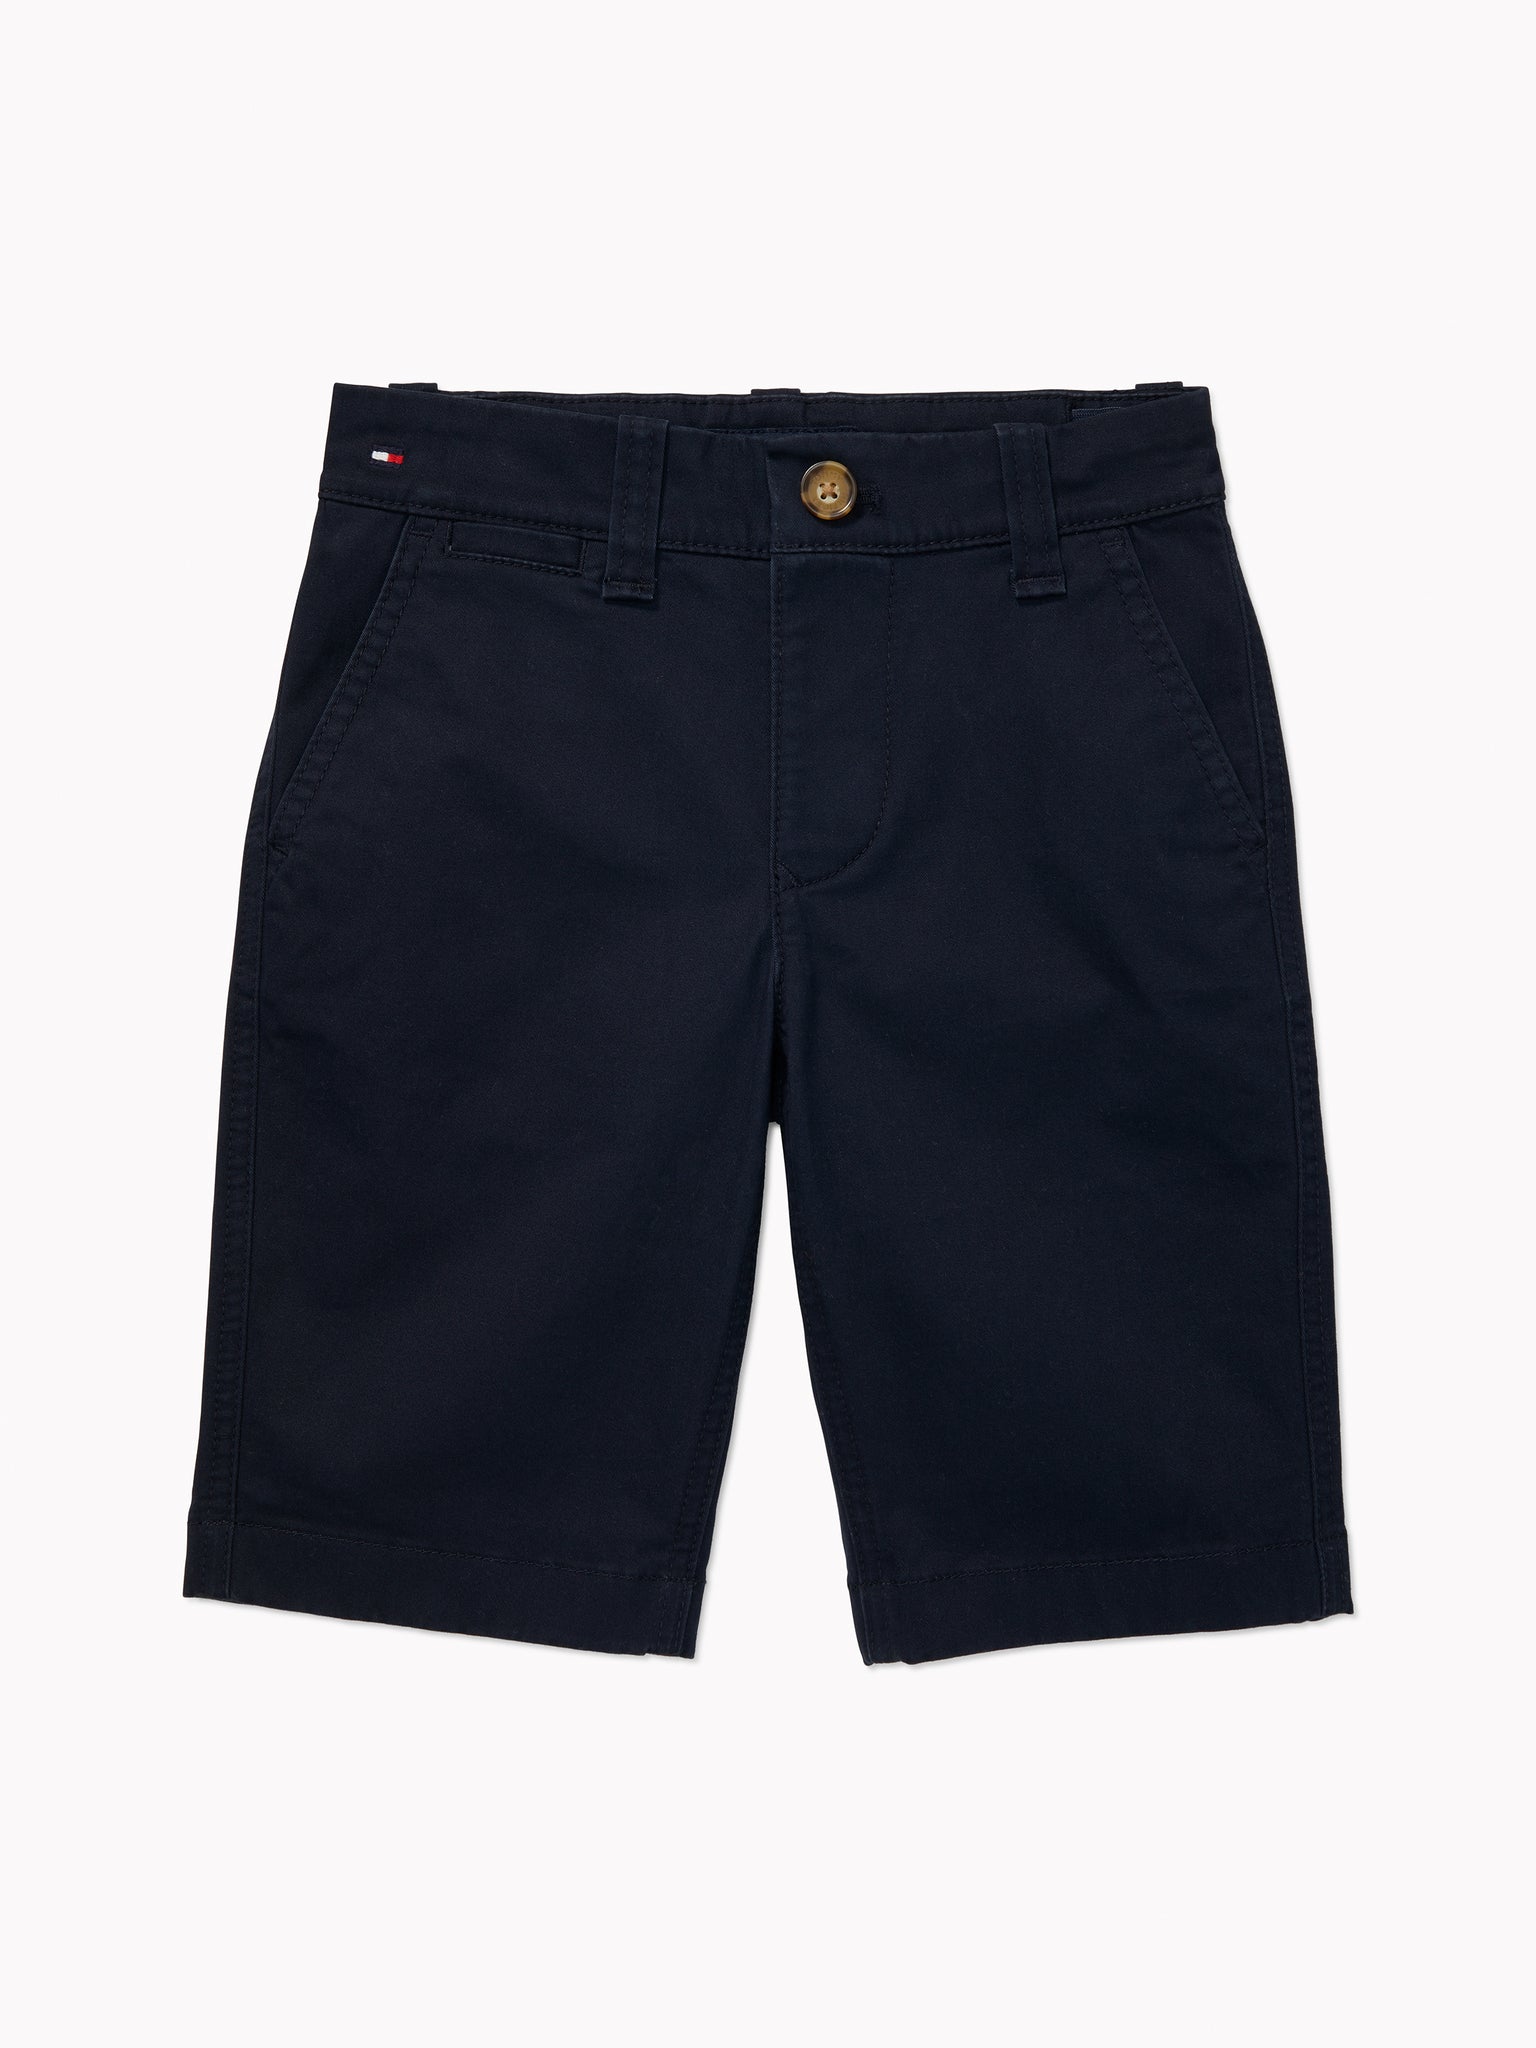 Seated Fit Solid Short (Boys) - Navy